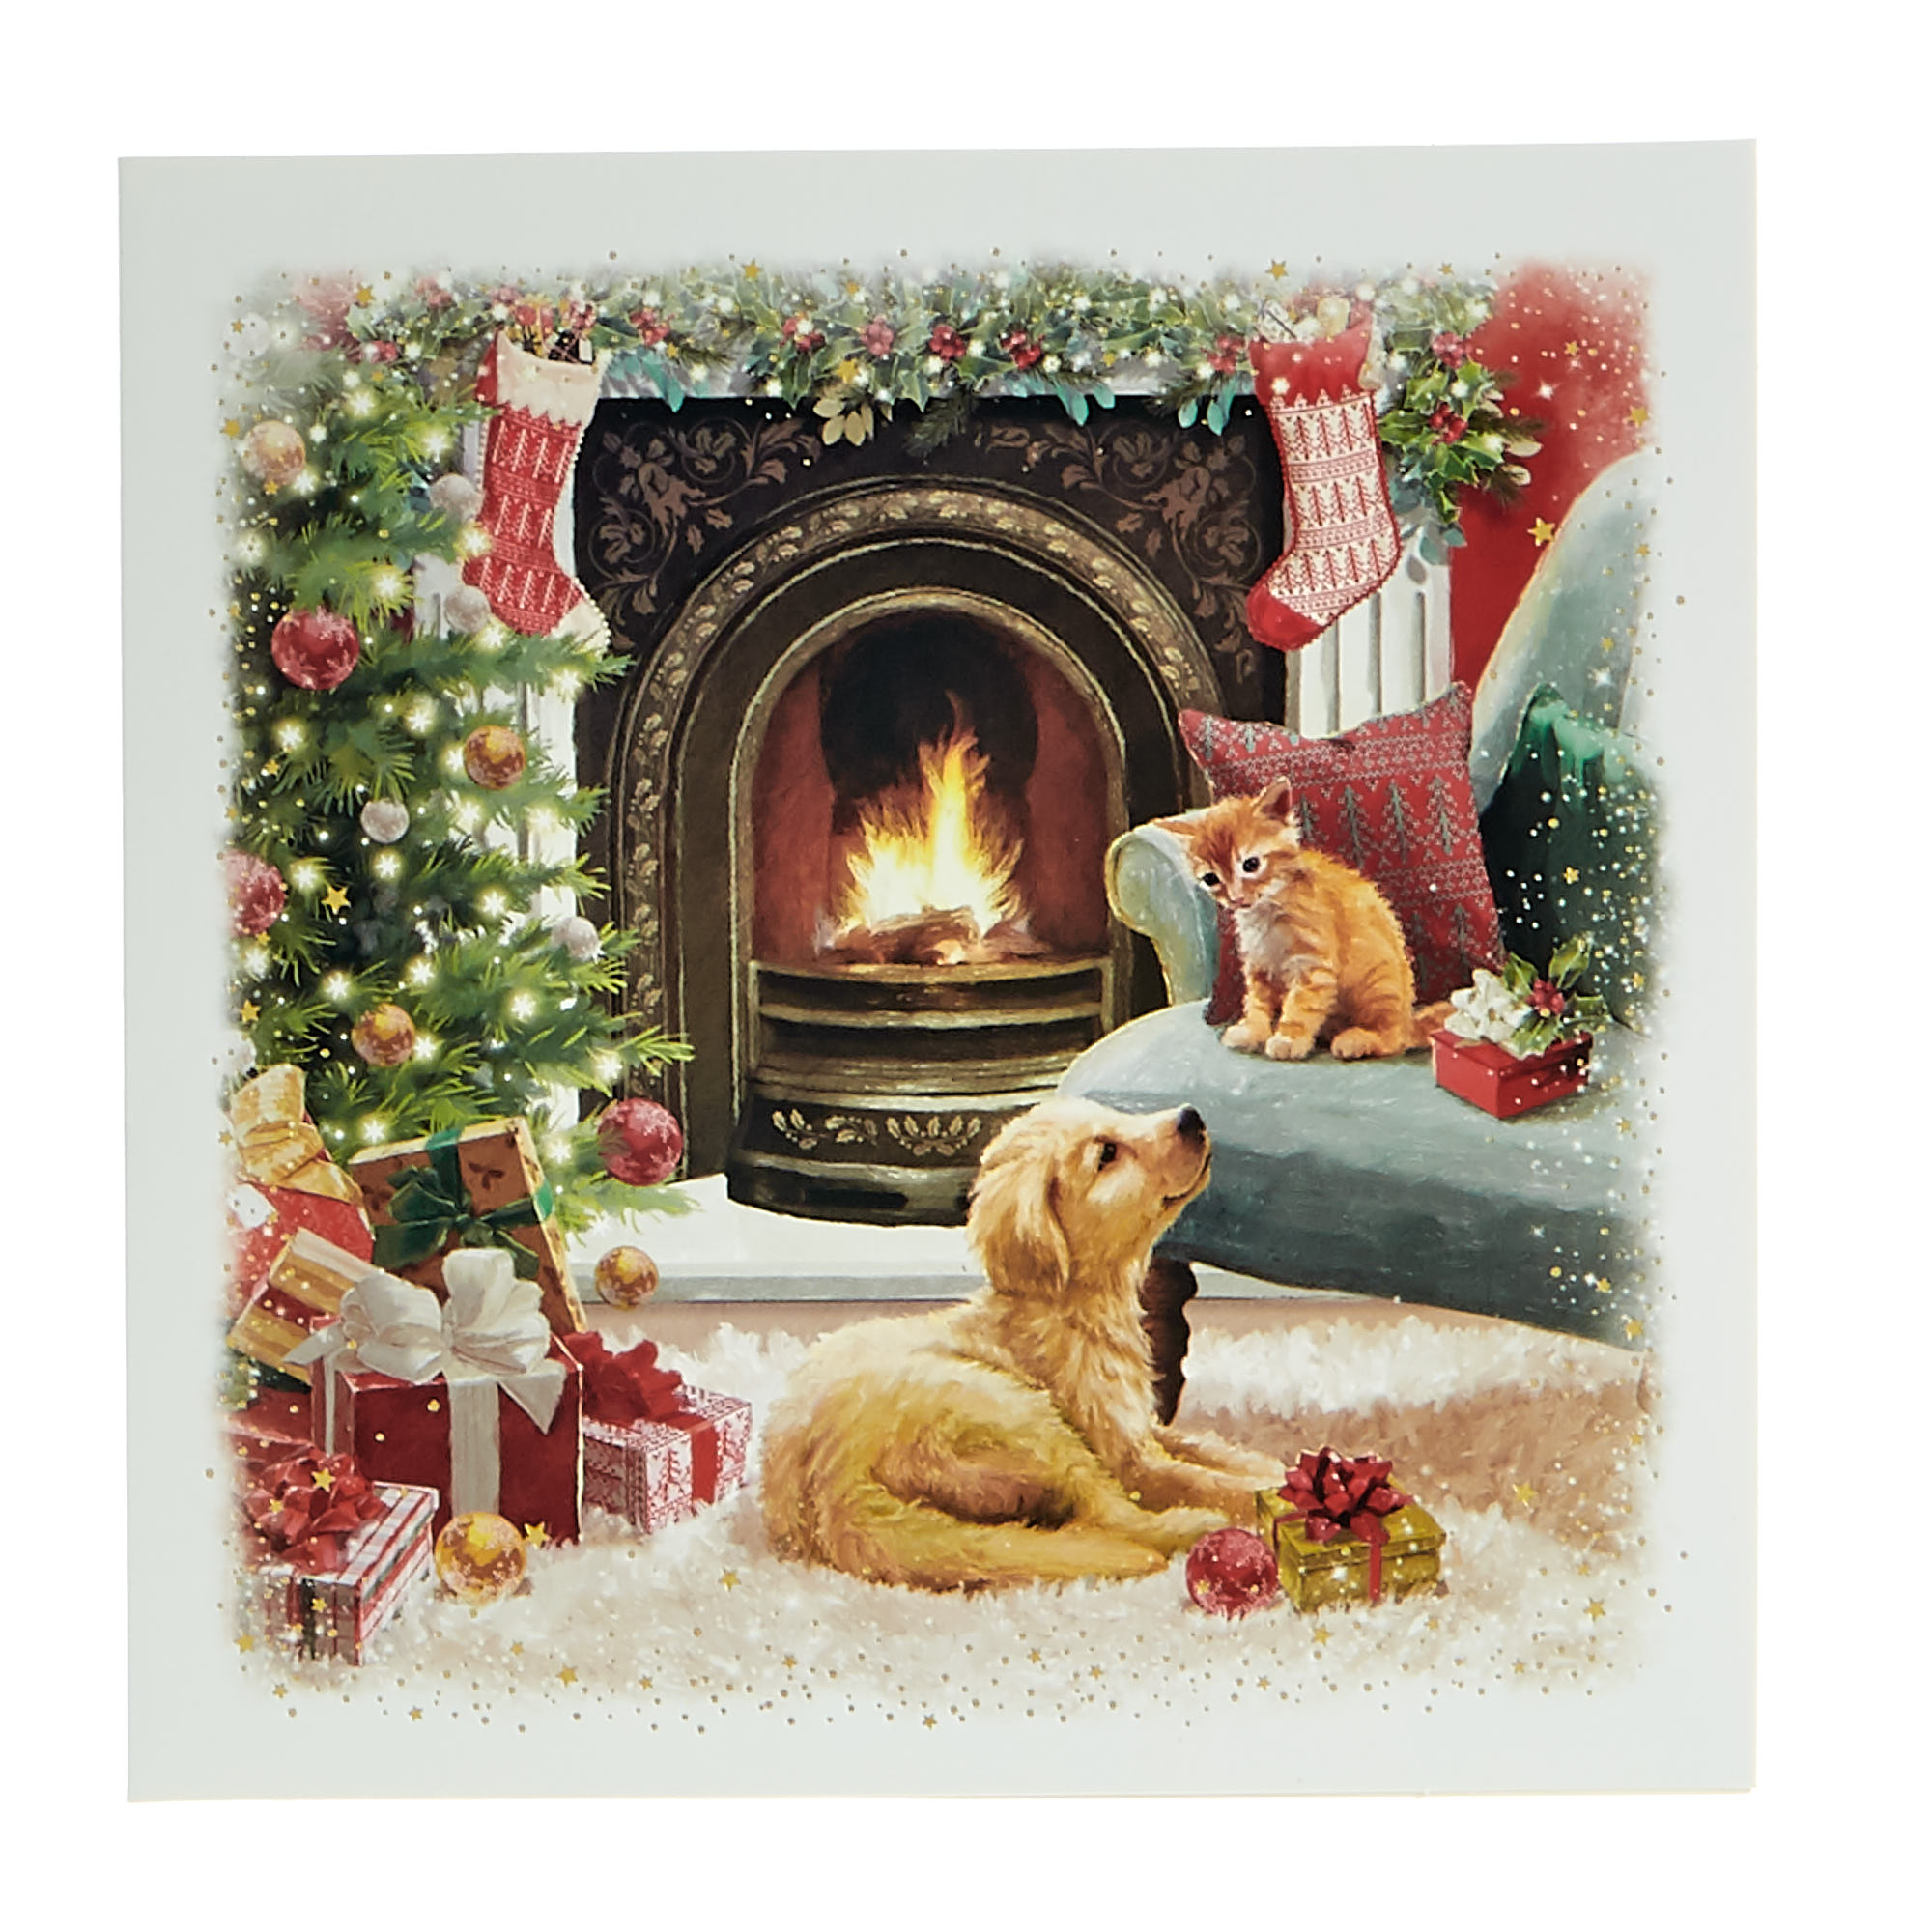 16 Charity Christmas Cards - Cats & Dogs (2 Designs)